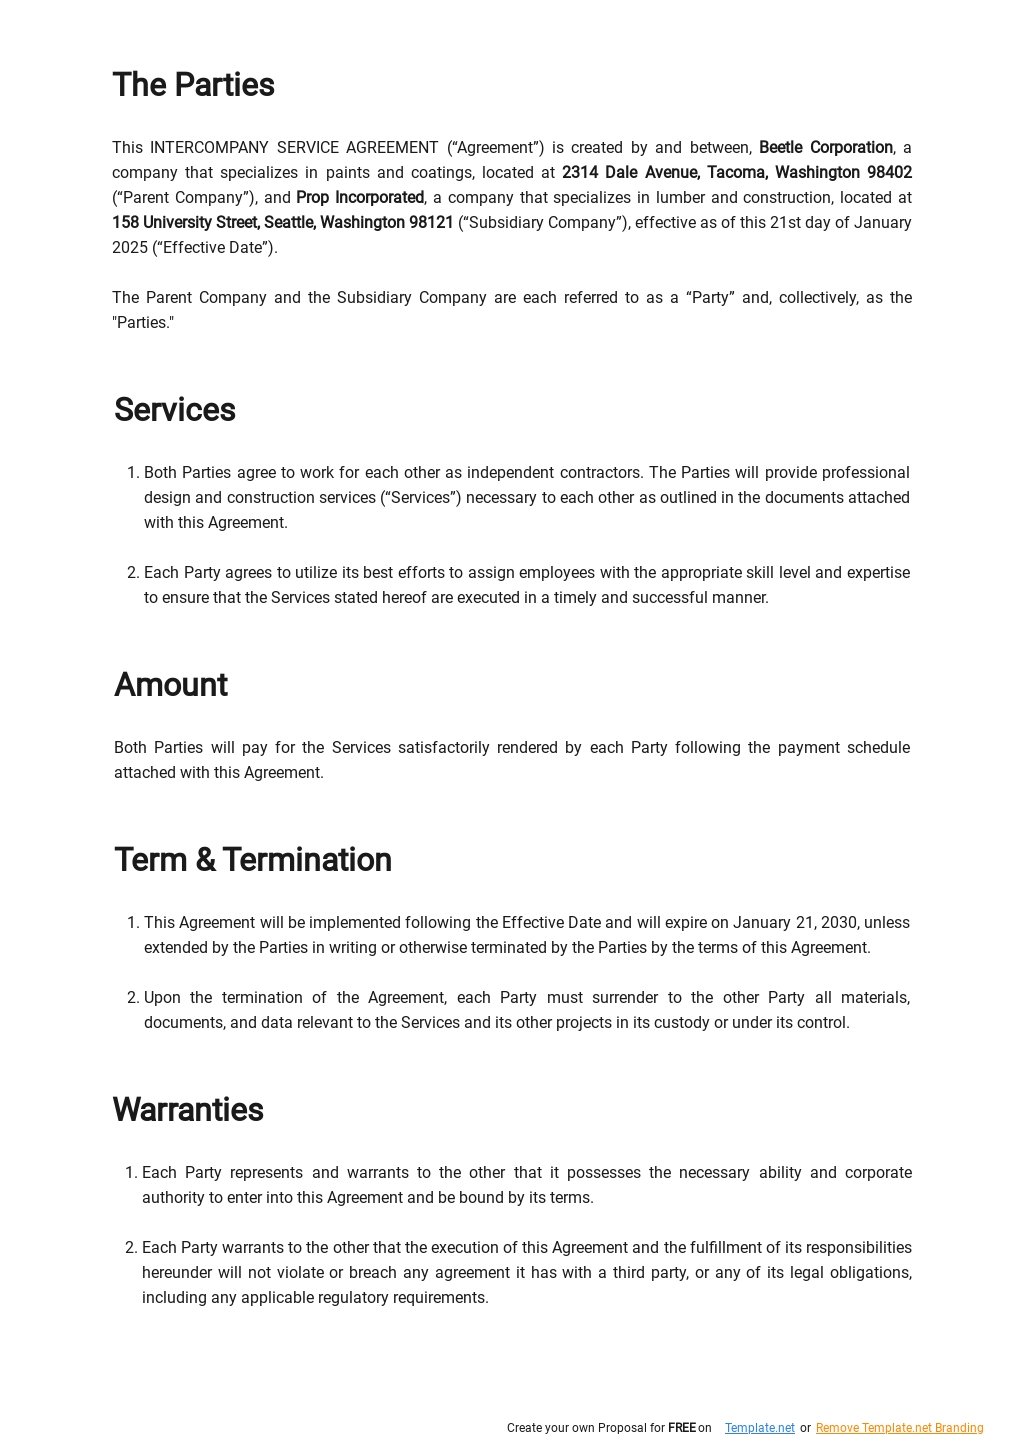 FREE Simple Service Agreement Template in Google Docs, Word